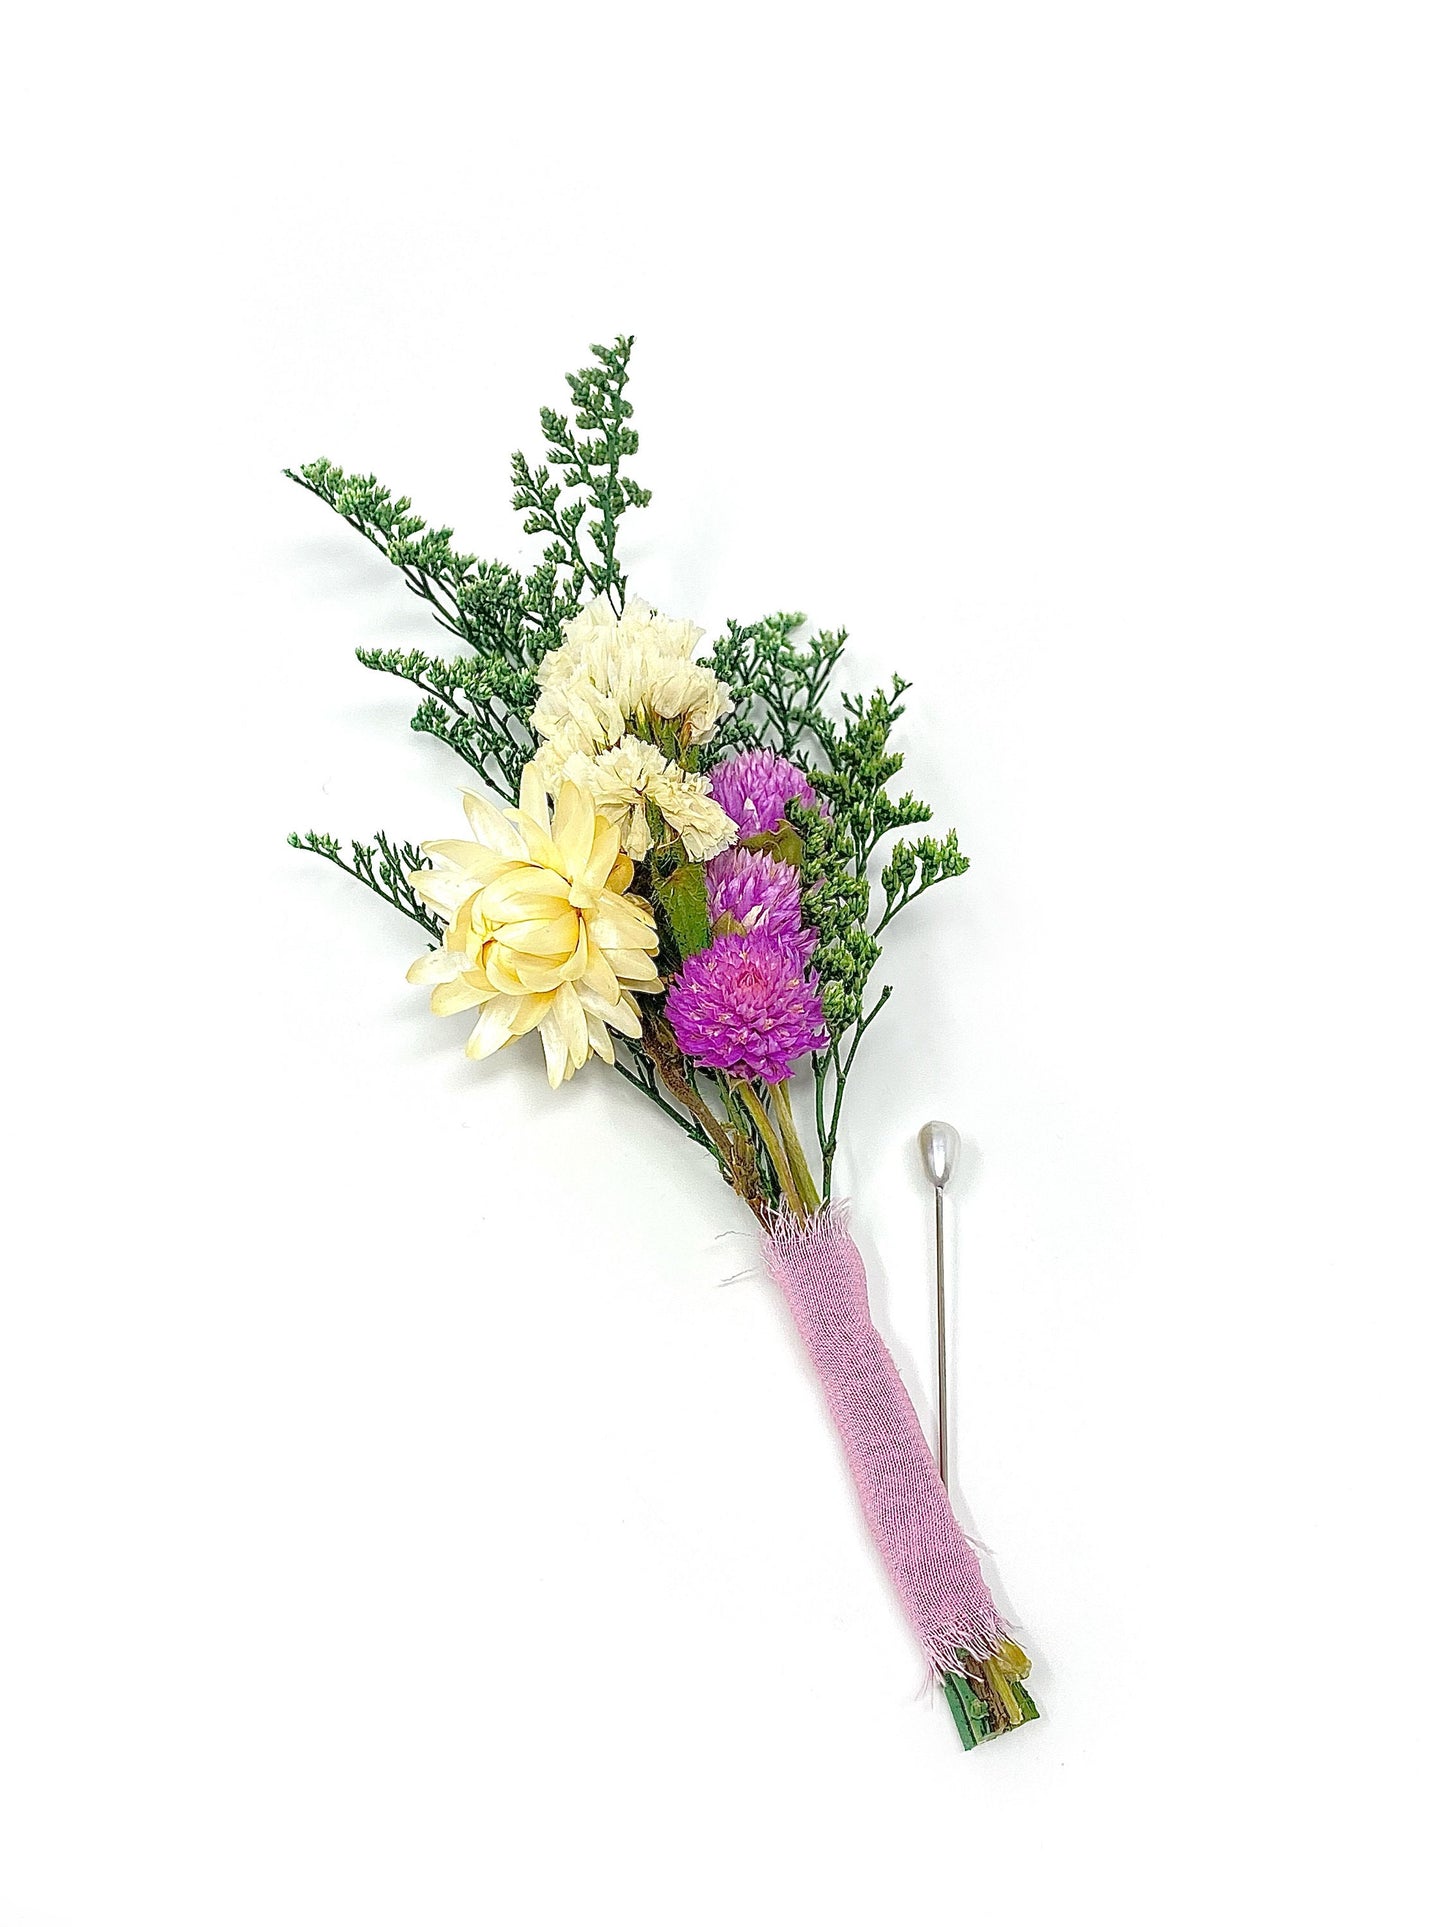 Boutonniere, Wedding Accessories, Dried Flowers, Preserved Floral, Bridal, Decor, Pink and White, Strawflowers, Green